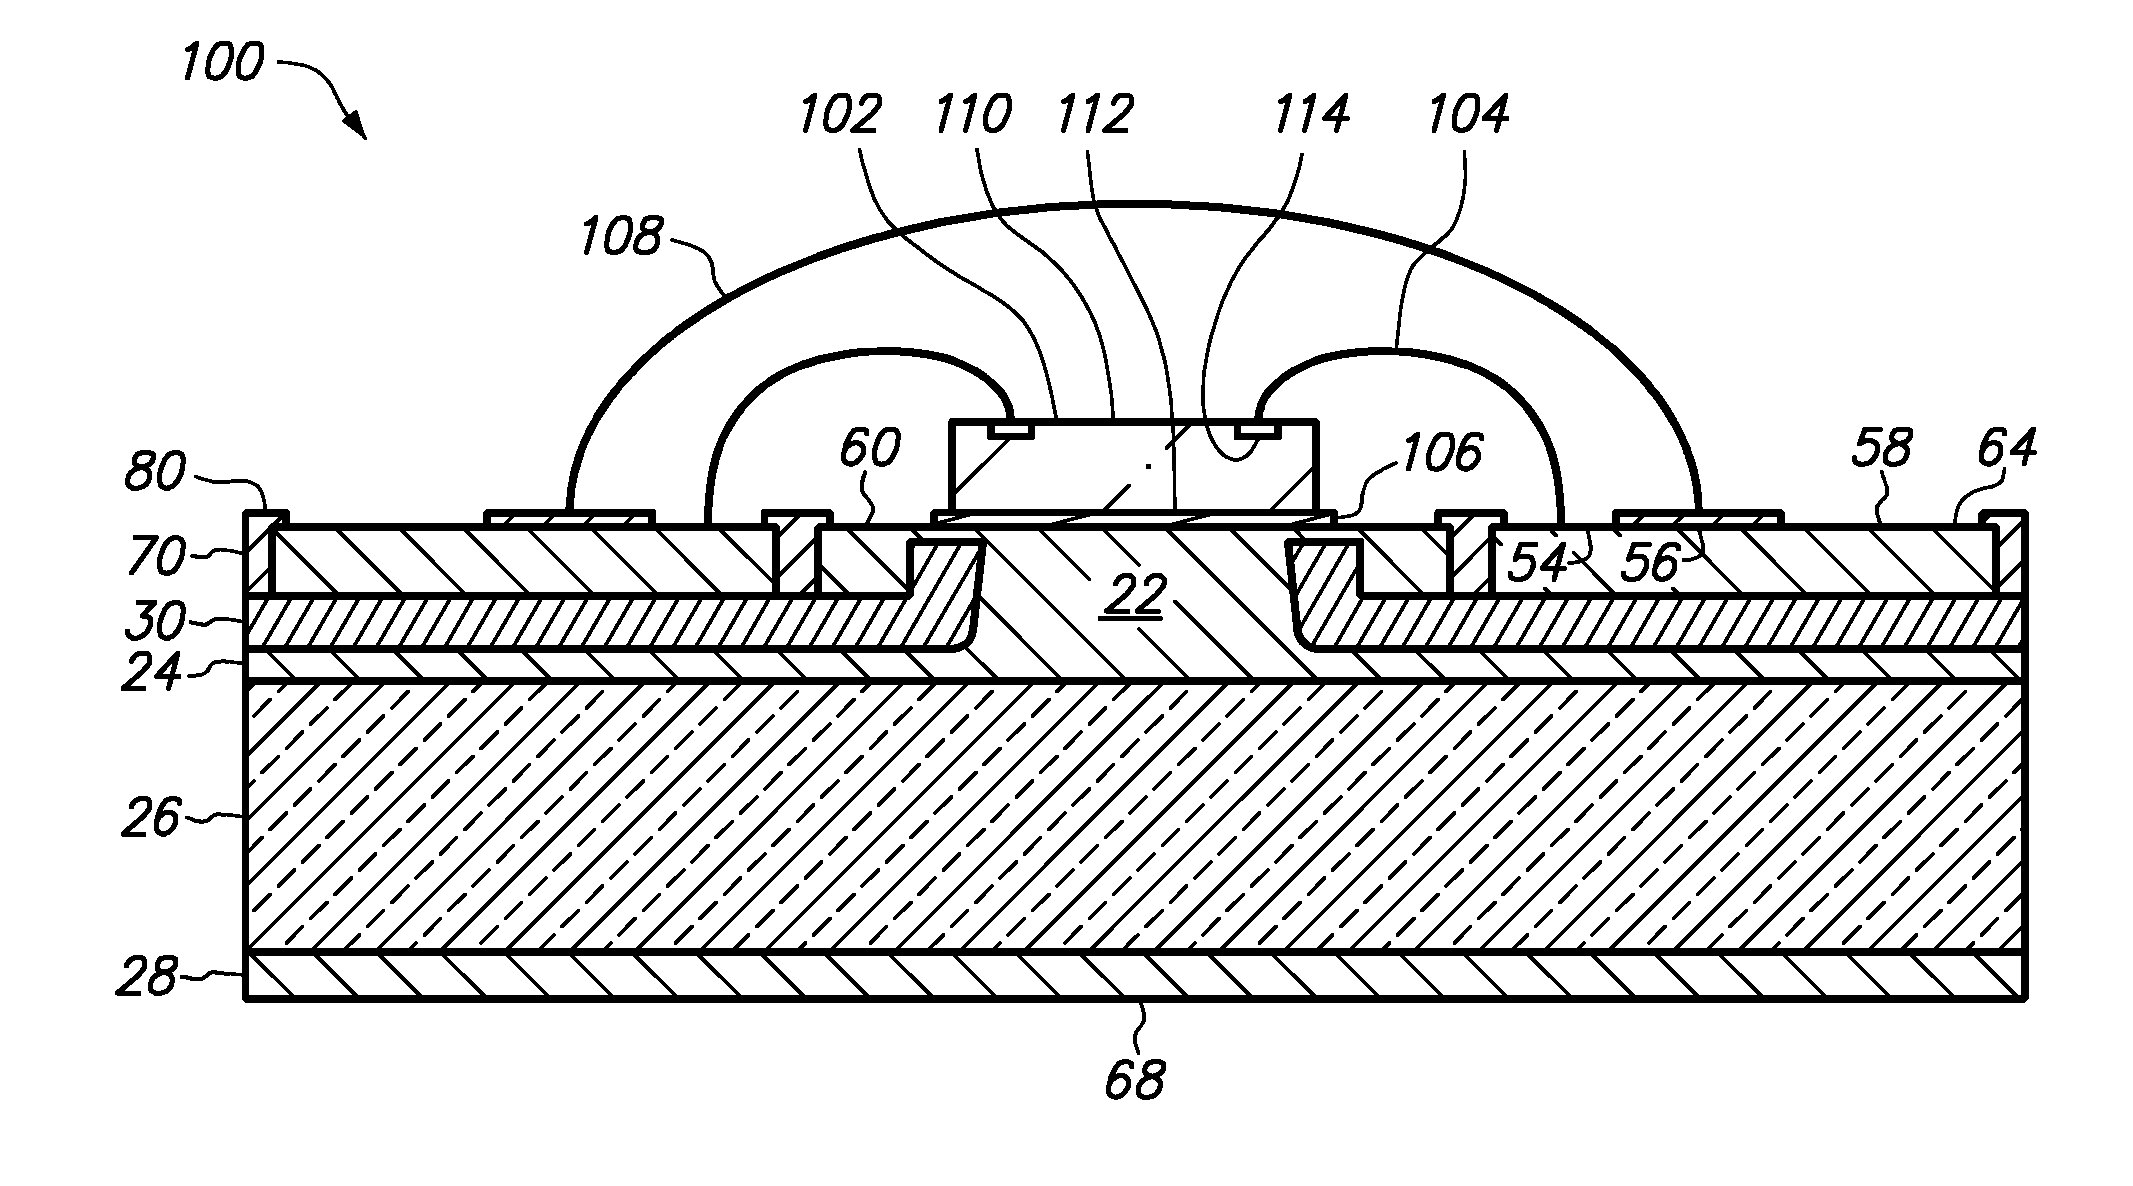 Method of making a semiconductor chip assembly with a post/base heat spreader with a thermal via